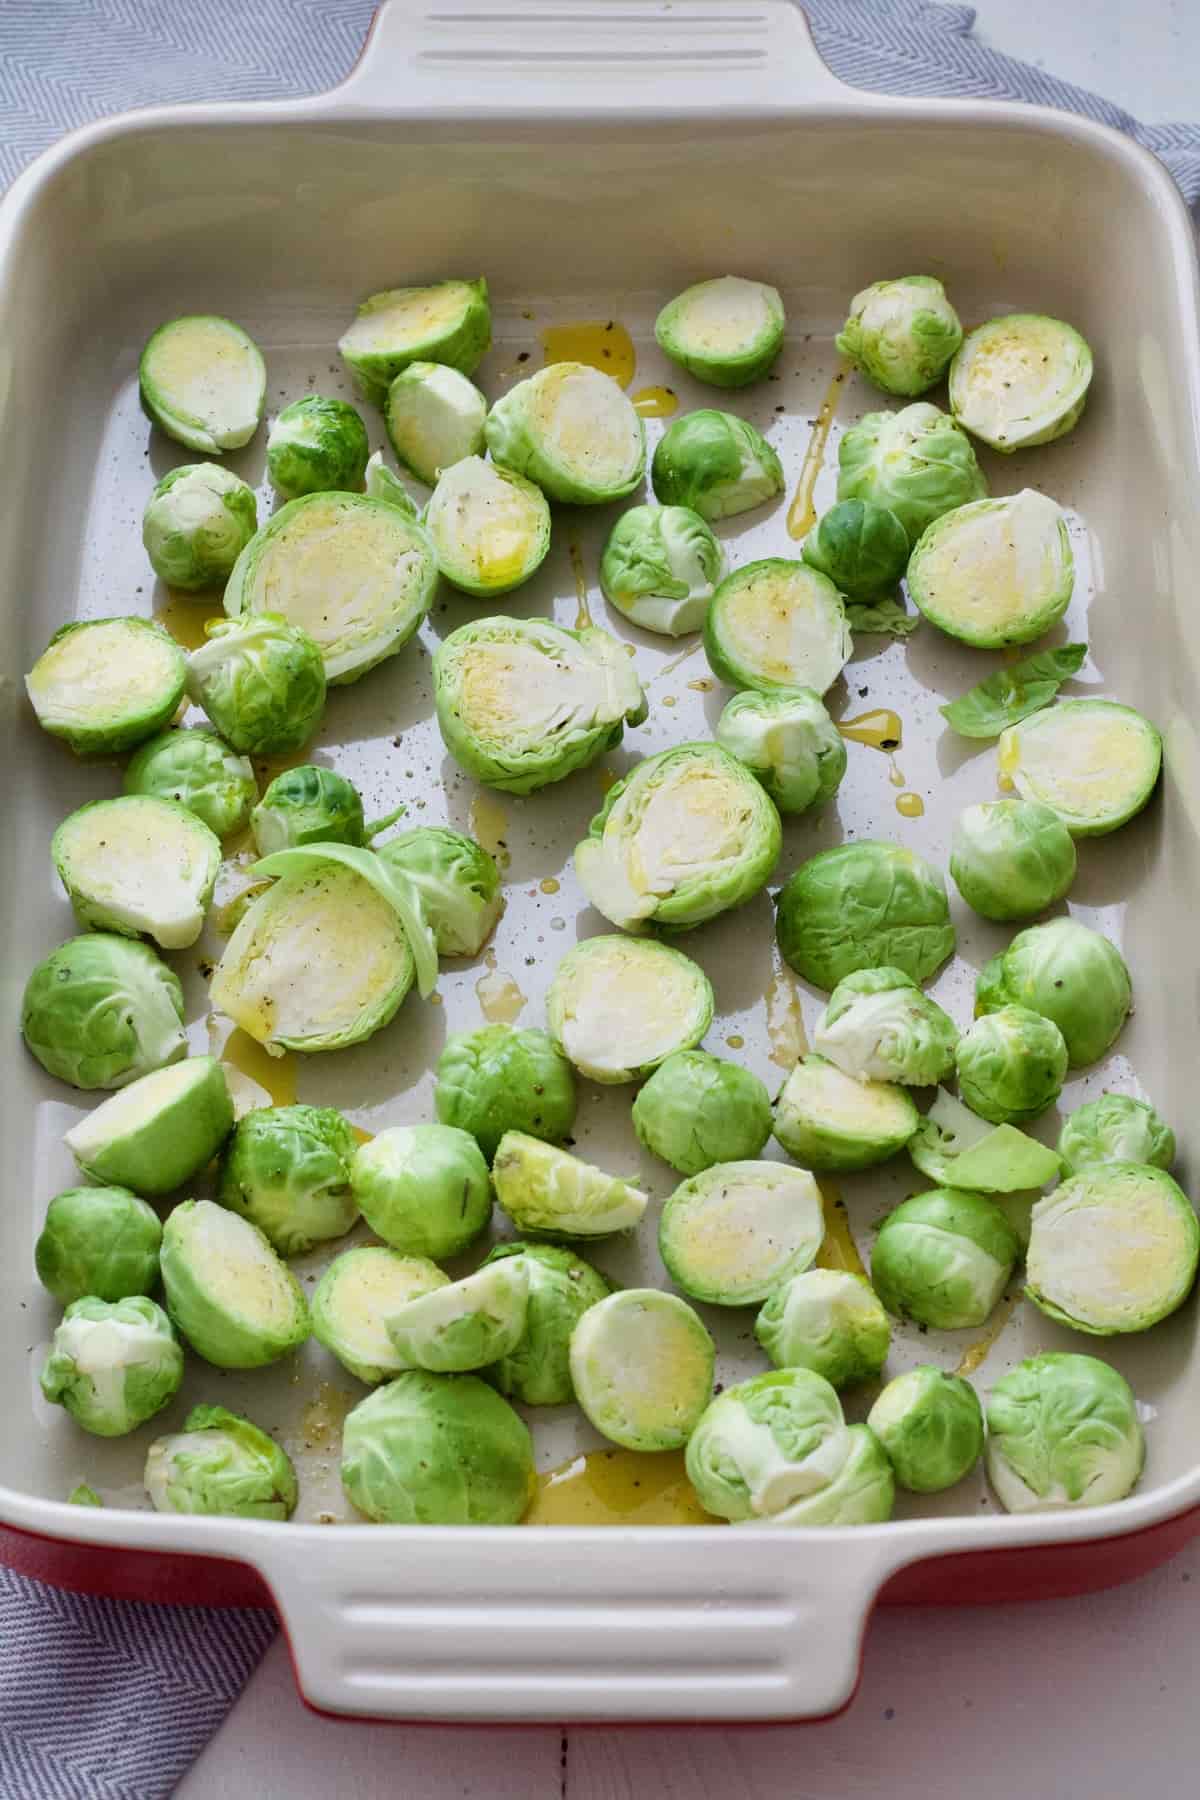 Prepared Brussels sprouts in a baking dish ready for roasting.